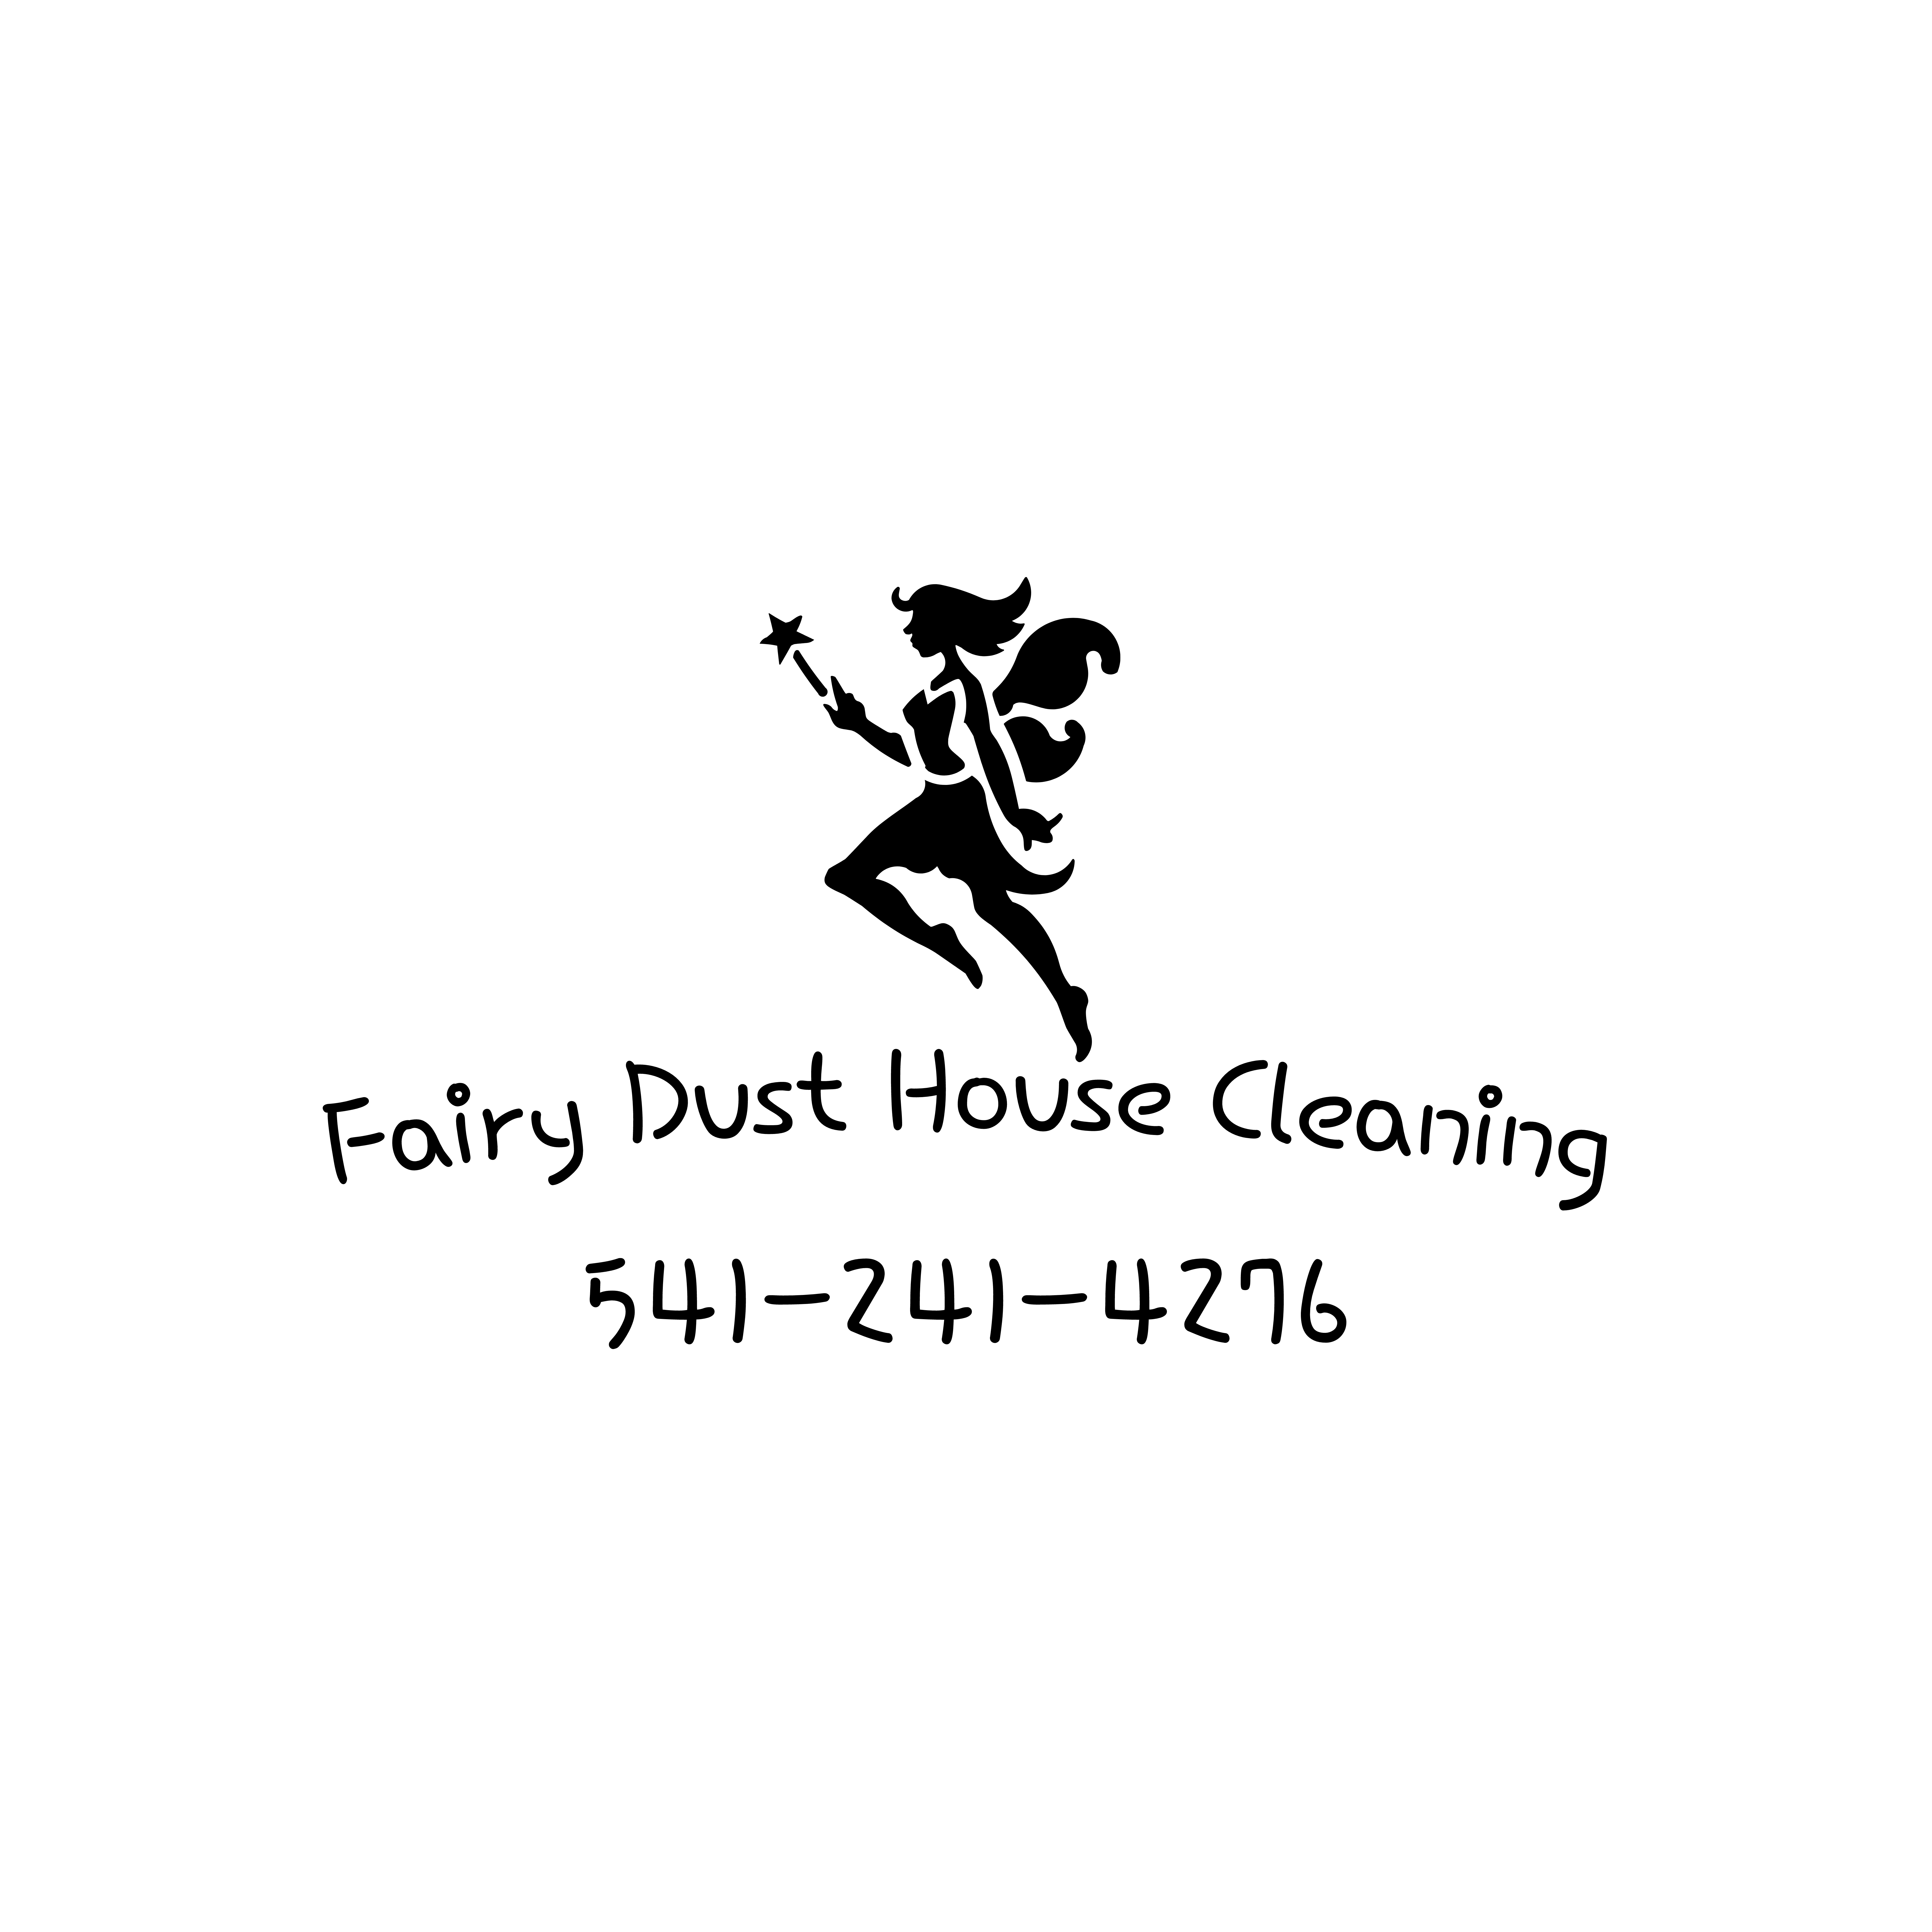 Fairy Dust House Cleaning